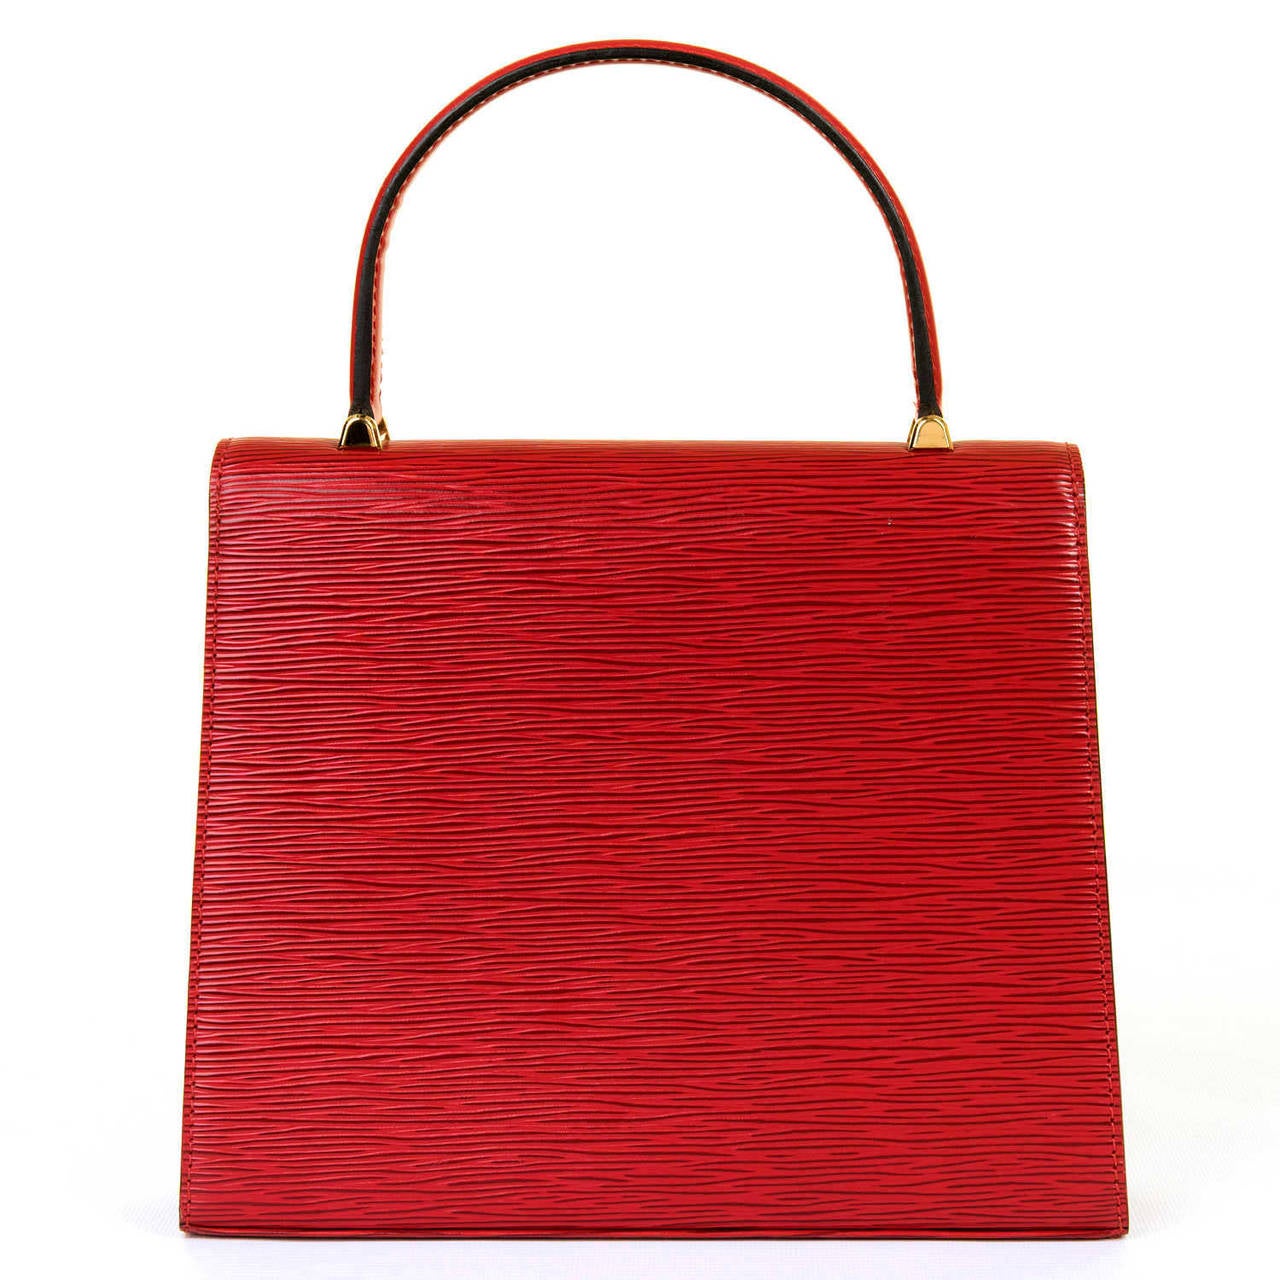 This very smart sculptured bag by Louis Vuitton is finished in red epi leather with gold-tone hardware and is in pristine 'New & Unused' condition inside and out. The bag comes complete with it's original dust sack.

FREE WORLDWIDE DELIVERY IS